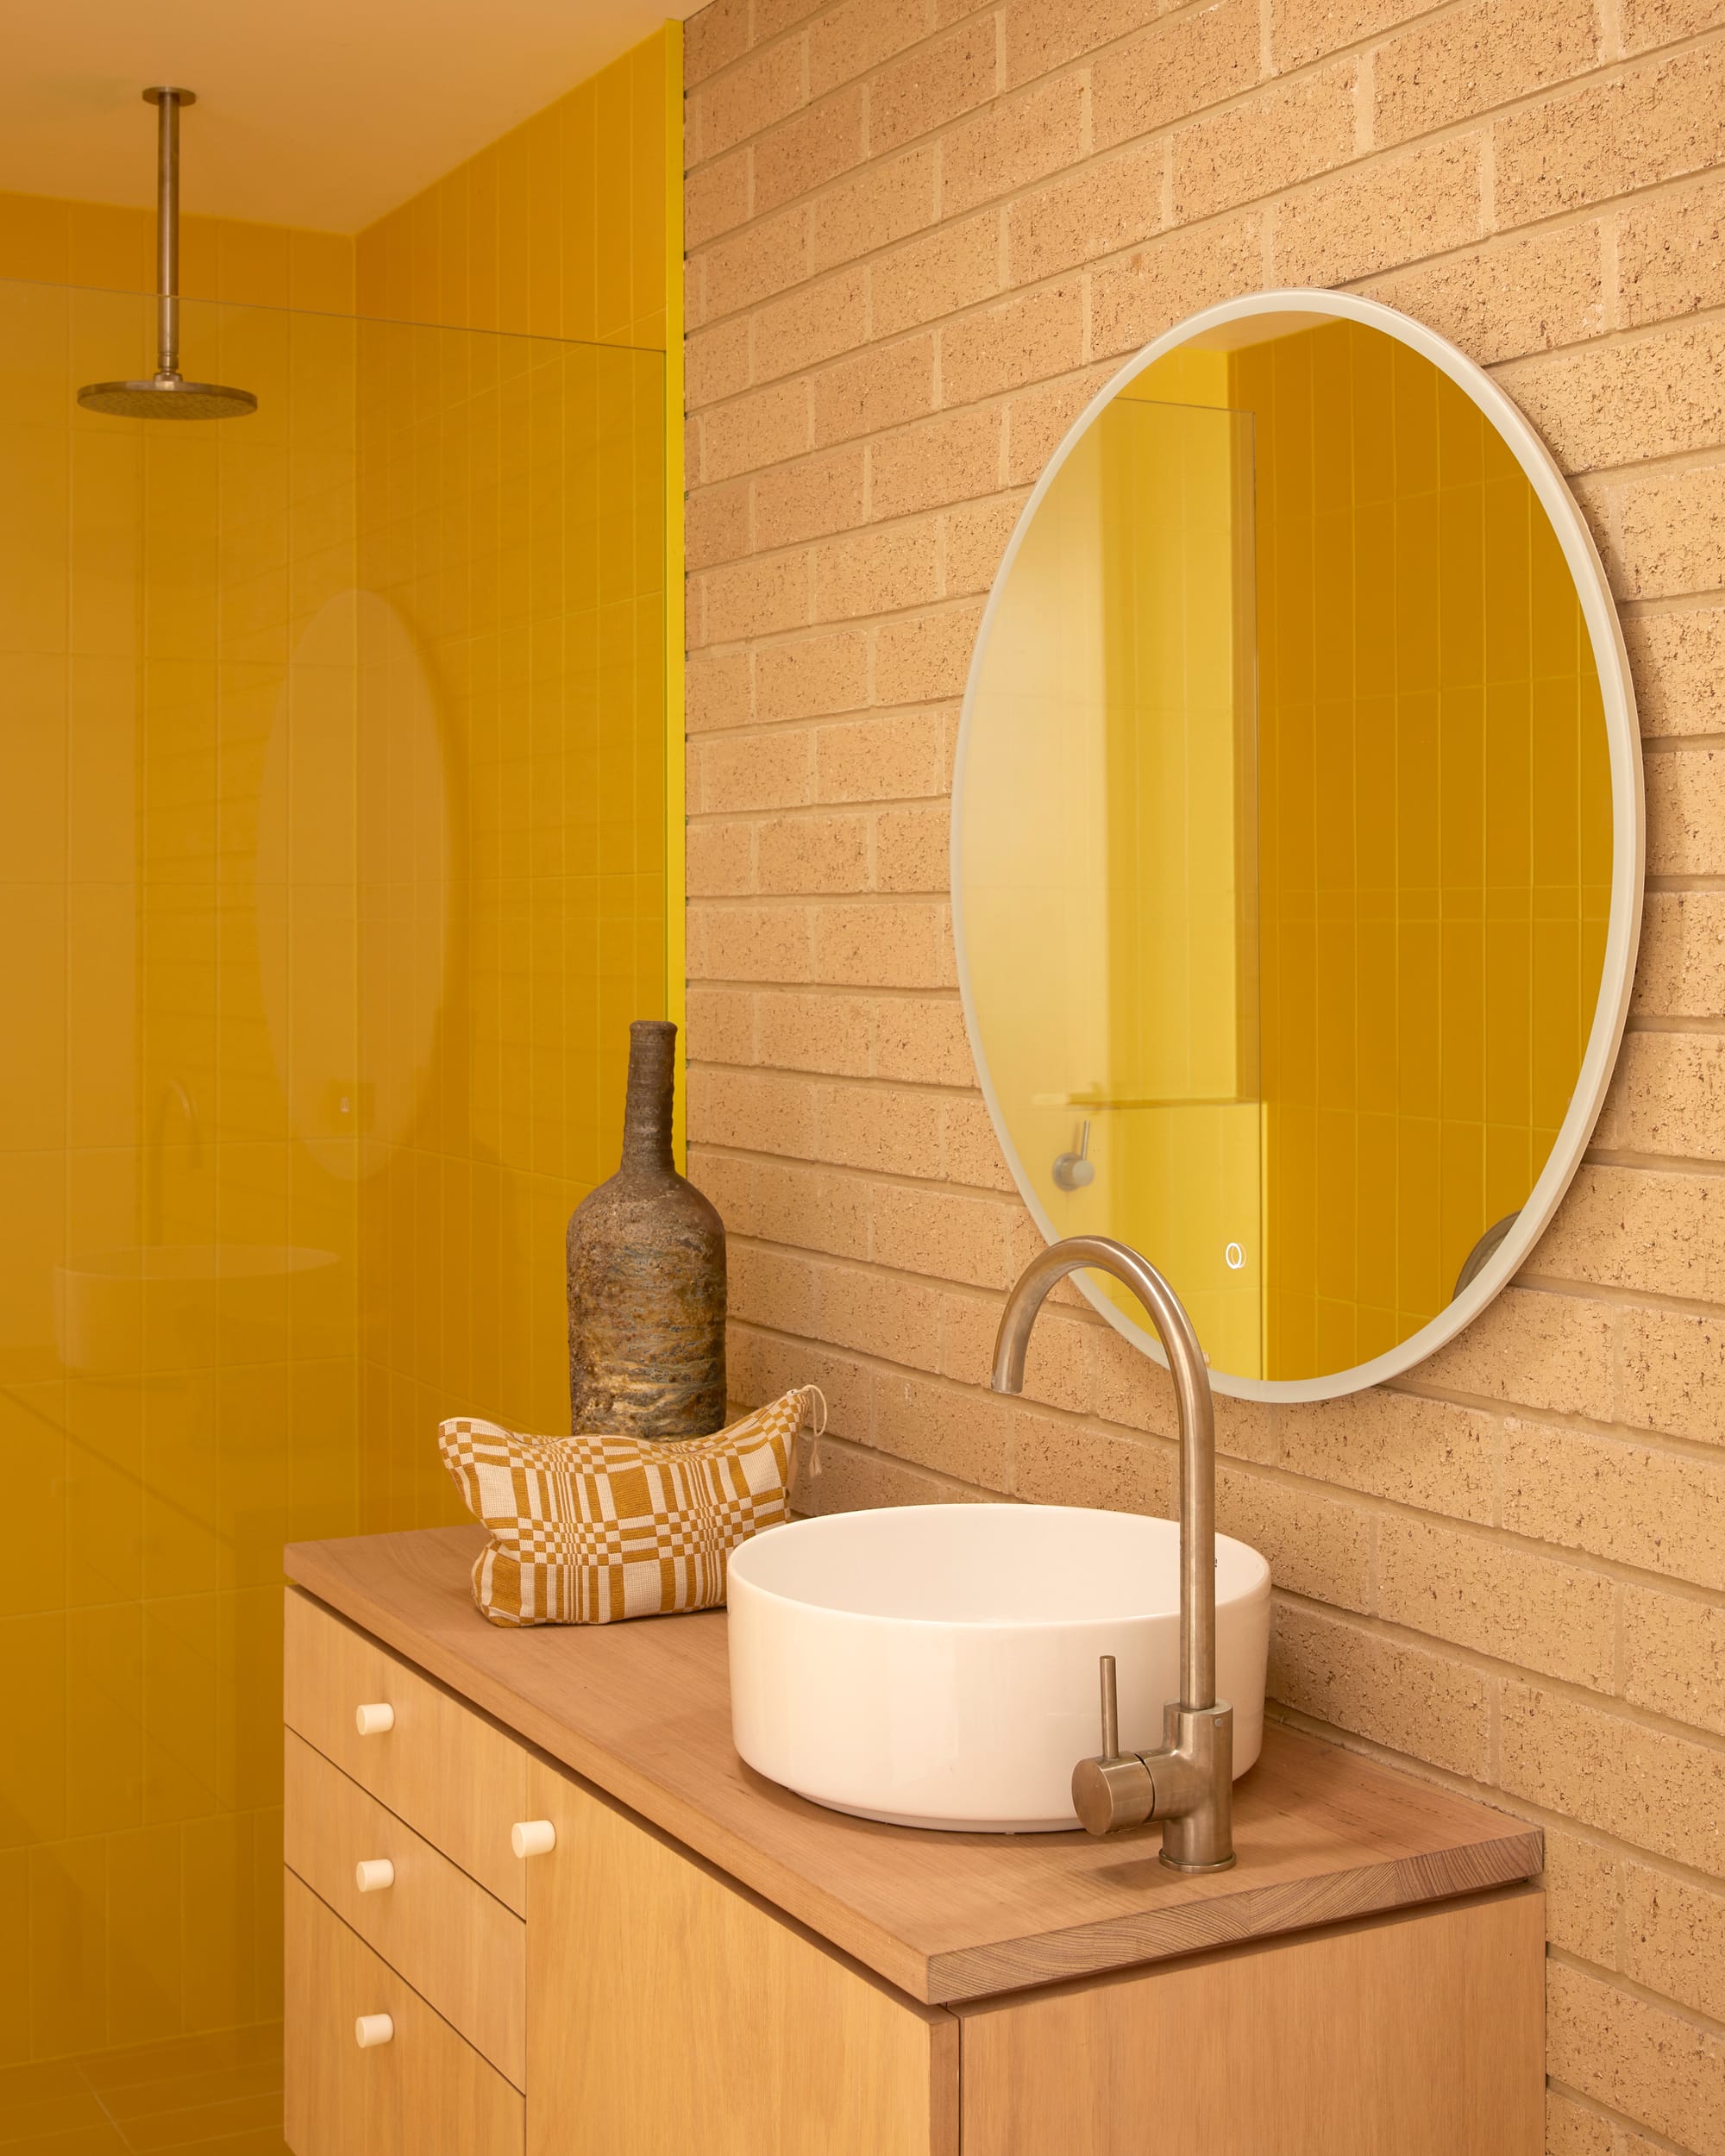 Harriet's House by SO:Architecture. Photography by Sean Fennessy. Bathroom with bright yellow tiles in shower. Pale brick walls. Tasmanian Oak counter and benchtop with round white sink.